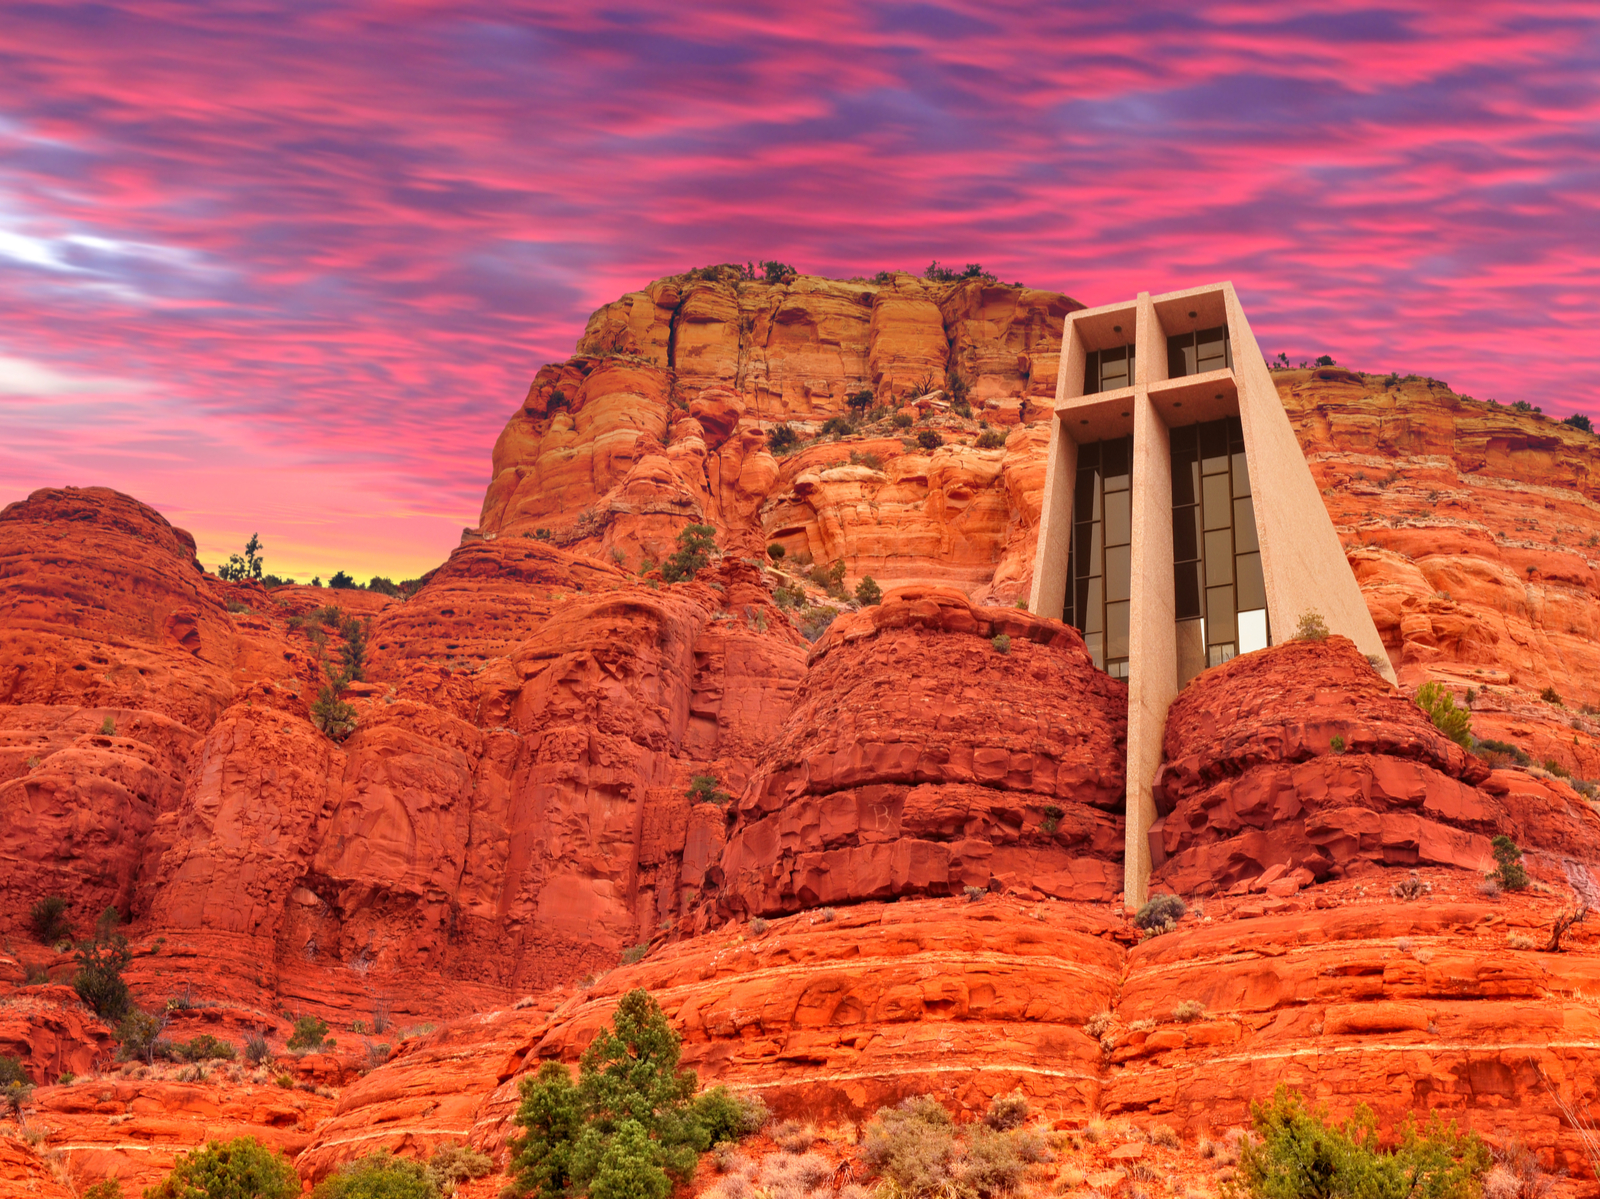 Holy Cross Chapel built into the red cliffside with a gorgeous red sky above